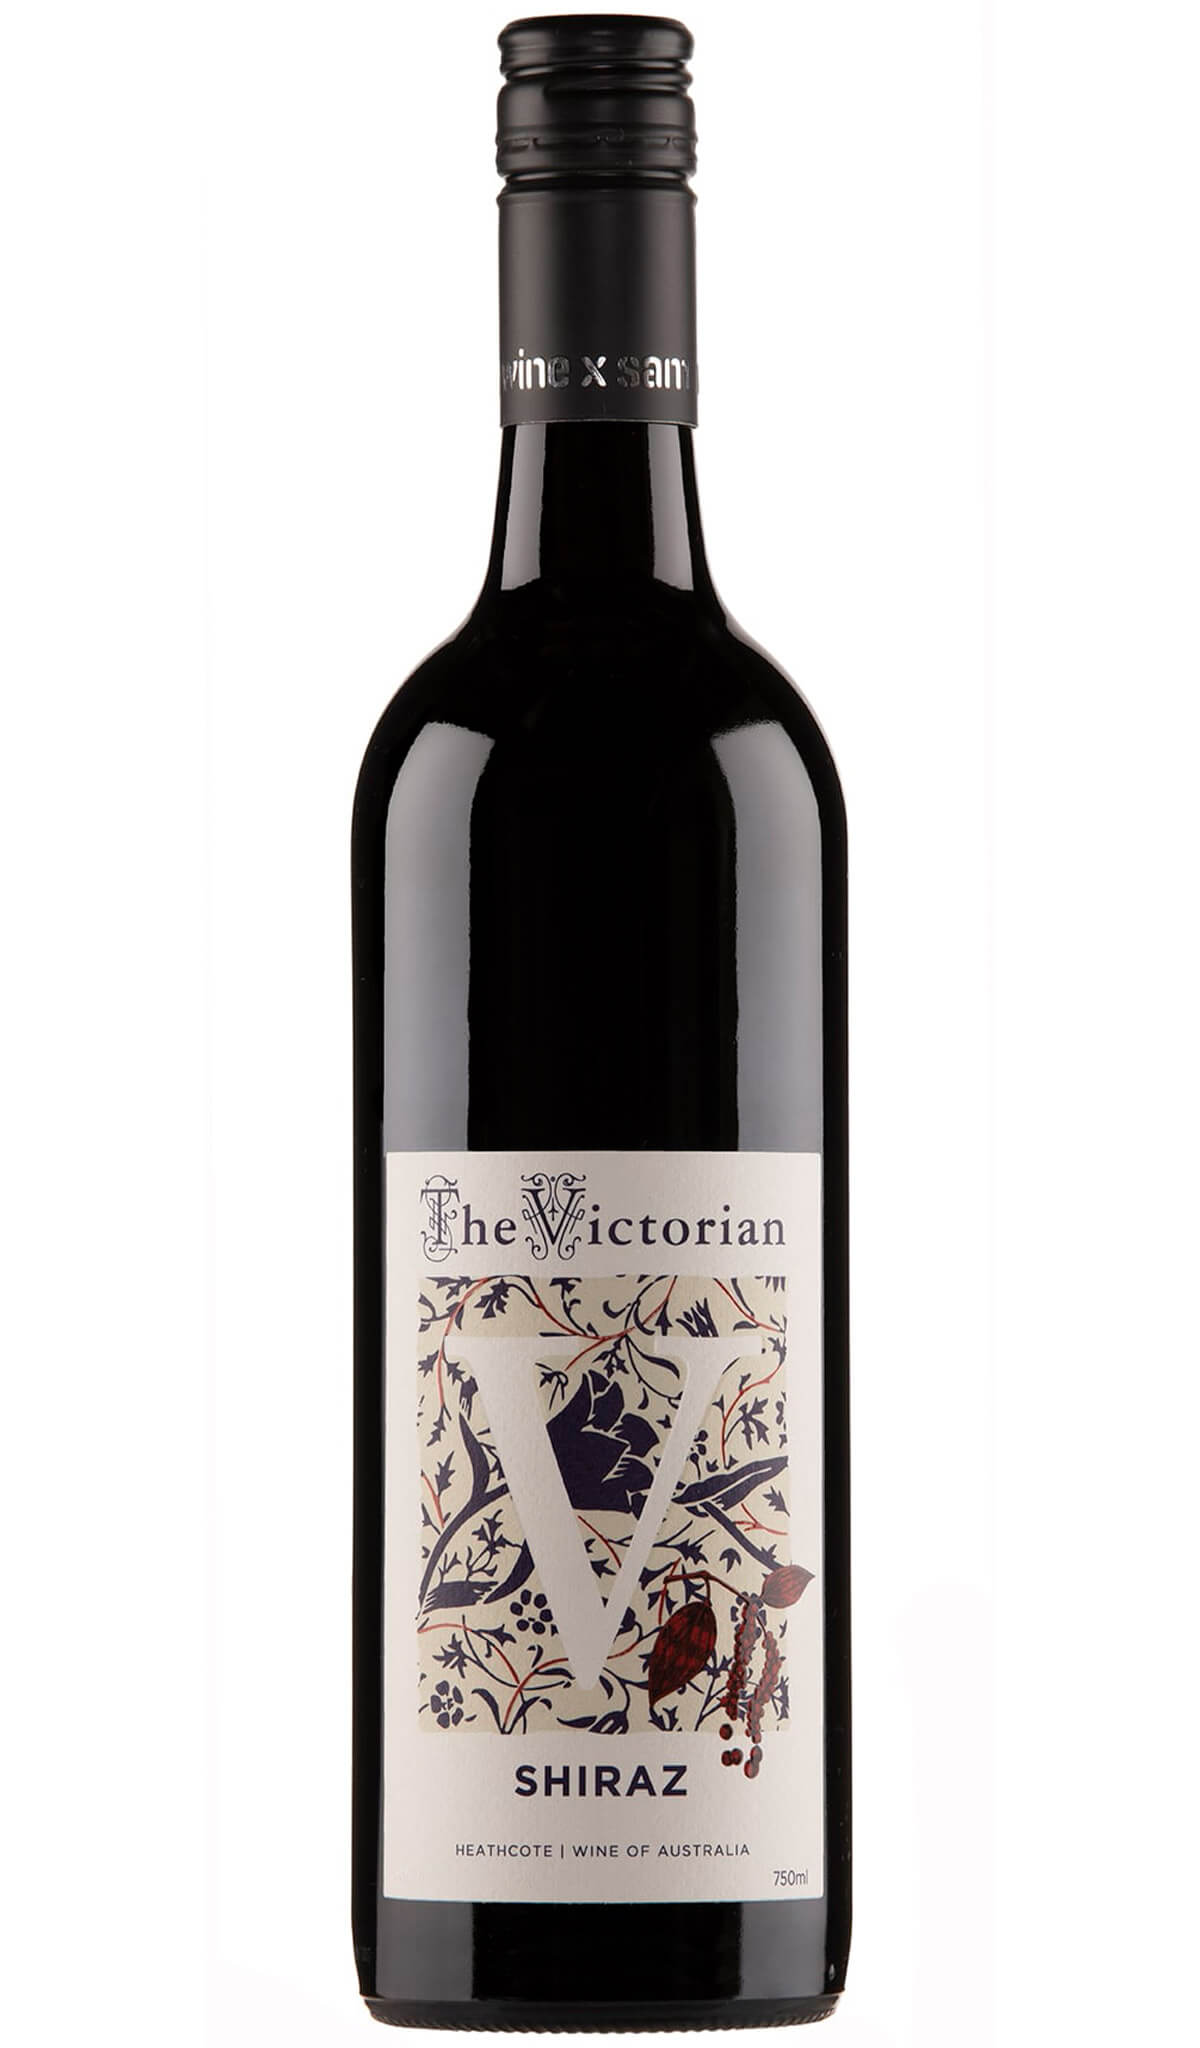 Find out more, explore the range and purchase Wine X Sam The Victorian Shiraz 2022 available online at Wine Sellers Direct - Australia's independent liquor specialists.